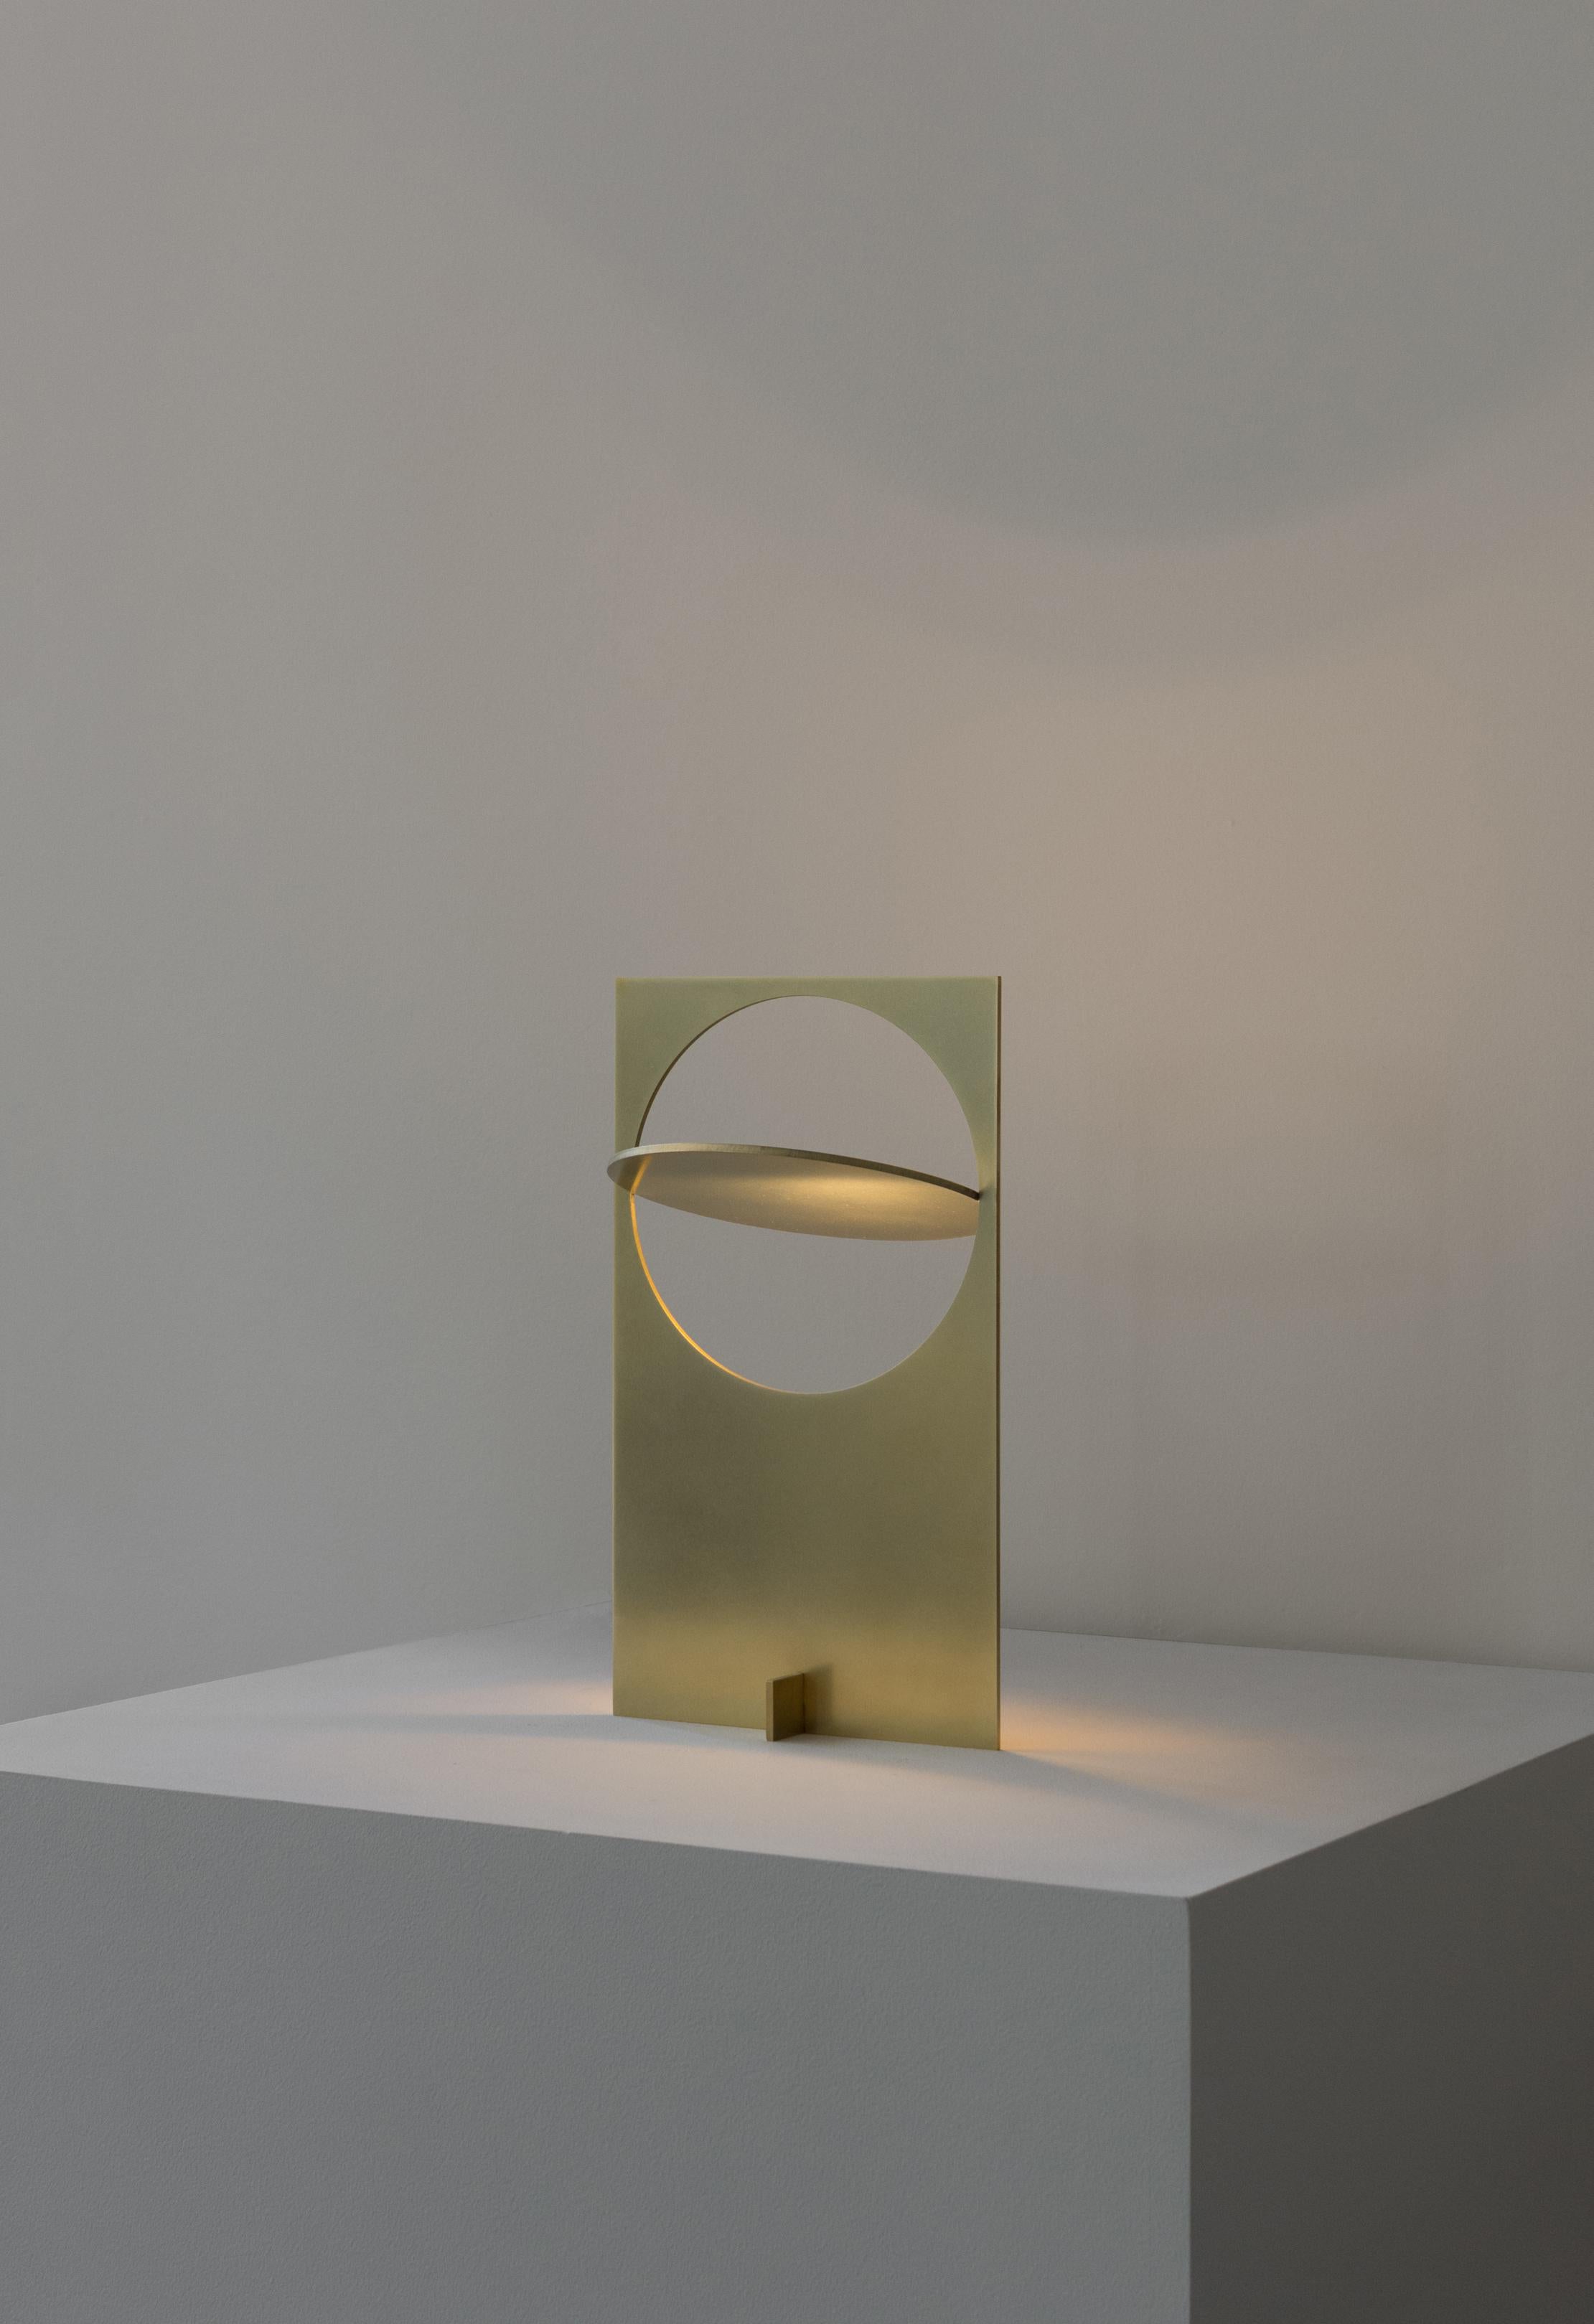 OBJ-01 brass table lamp by Manu Bano
Dimensions: H 38 x W 22 x D 7 cm
Material: brass

All lamps are wired for the US, but voltage converter is available for other countries. 

OBJ-01 is an understandable simple gesture, an object that needs